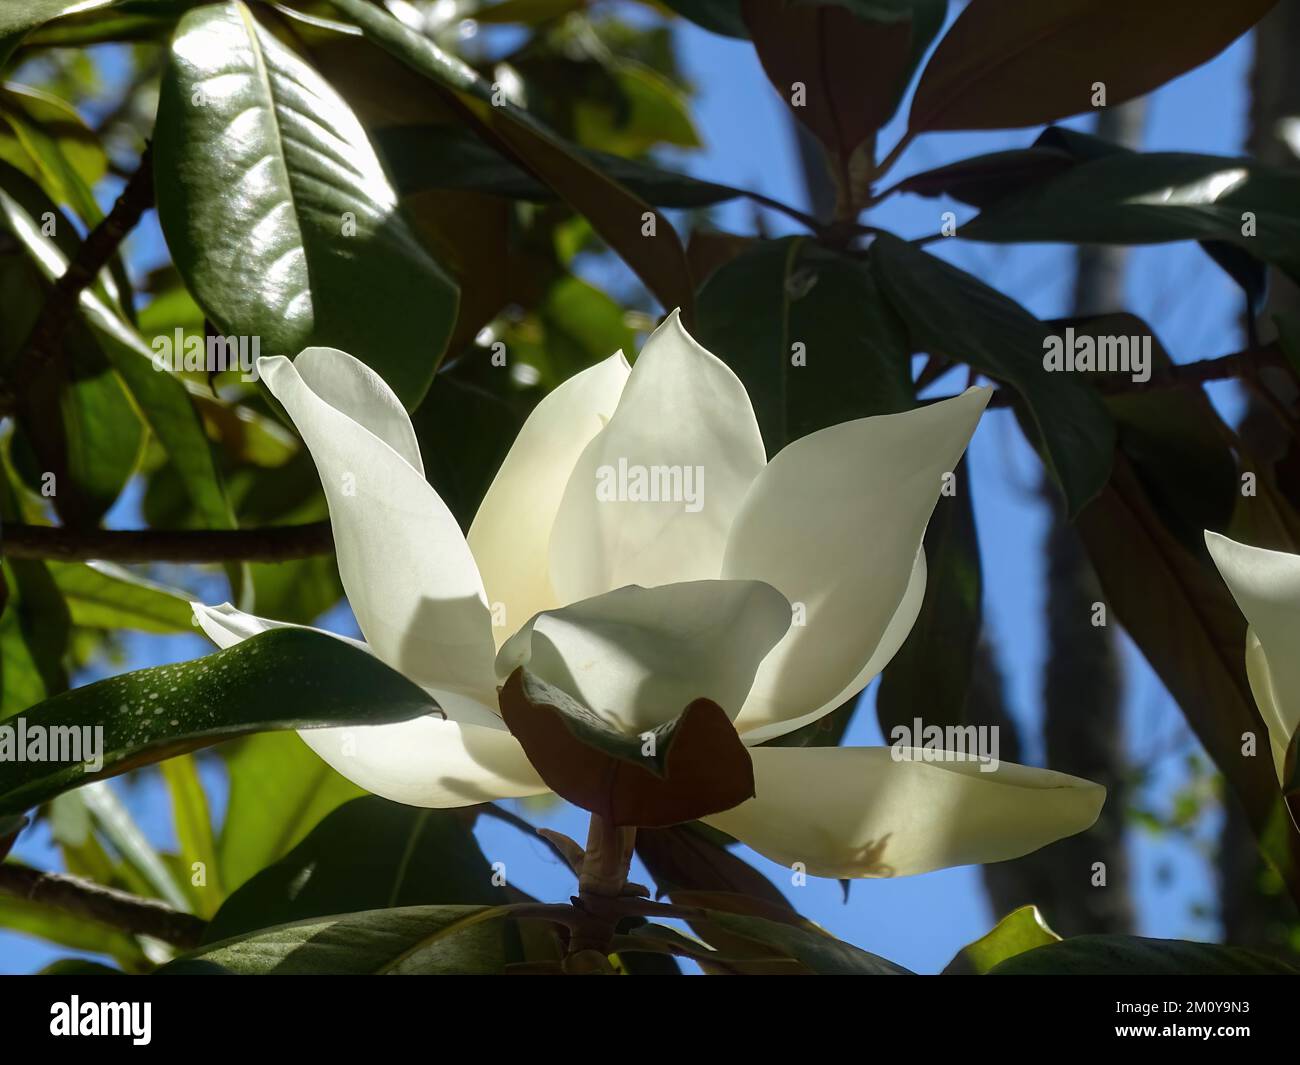 A huge white magnolia flower on a branch Stock Photo